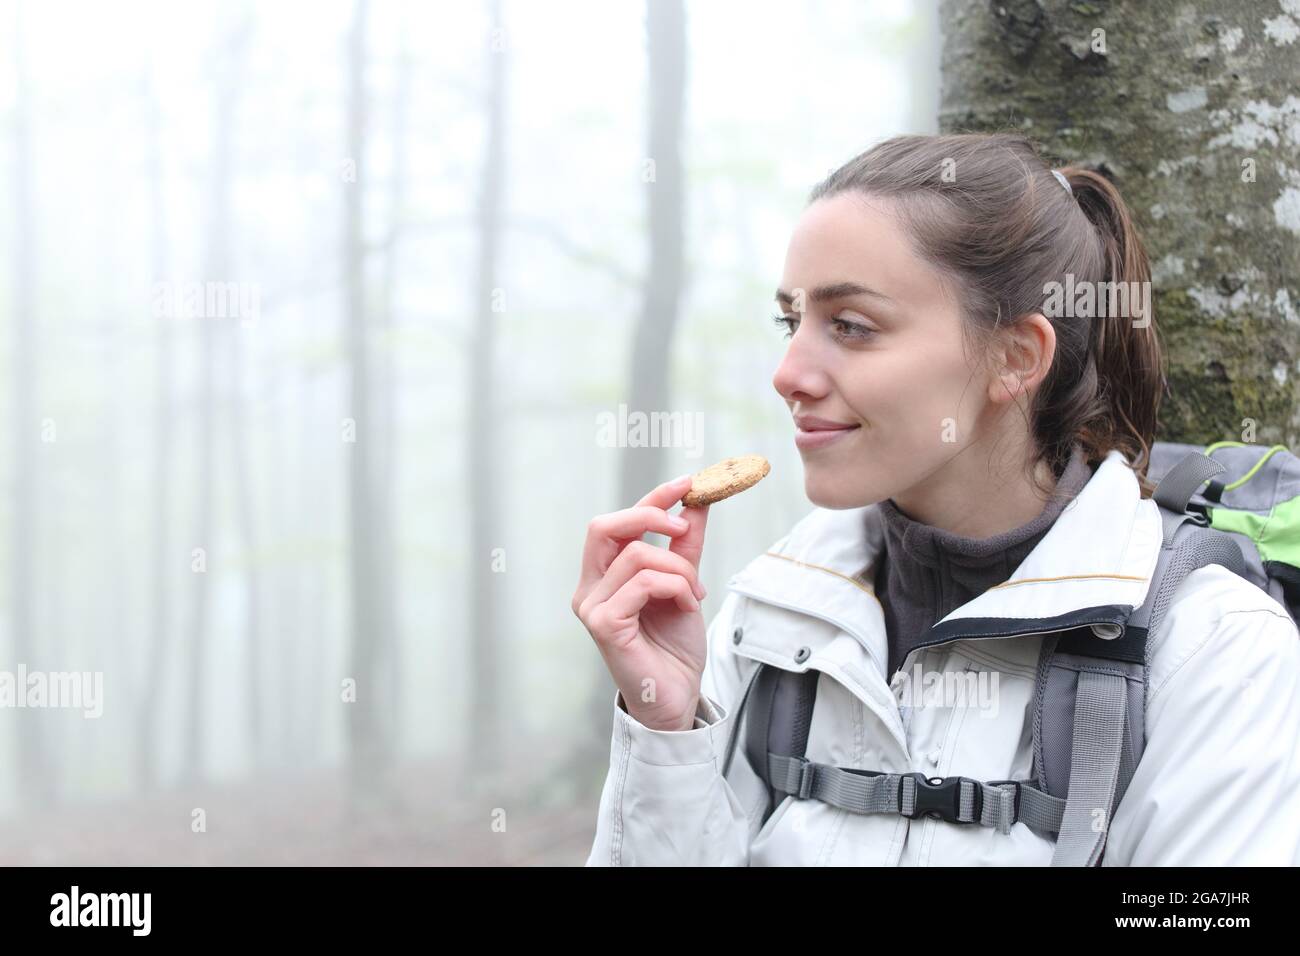 Satisfied trekker resting eating cookie in a forest Stock Photo